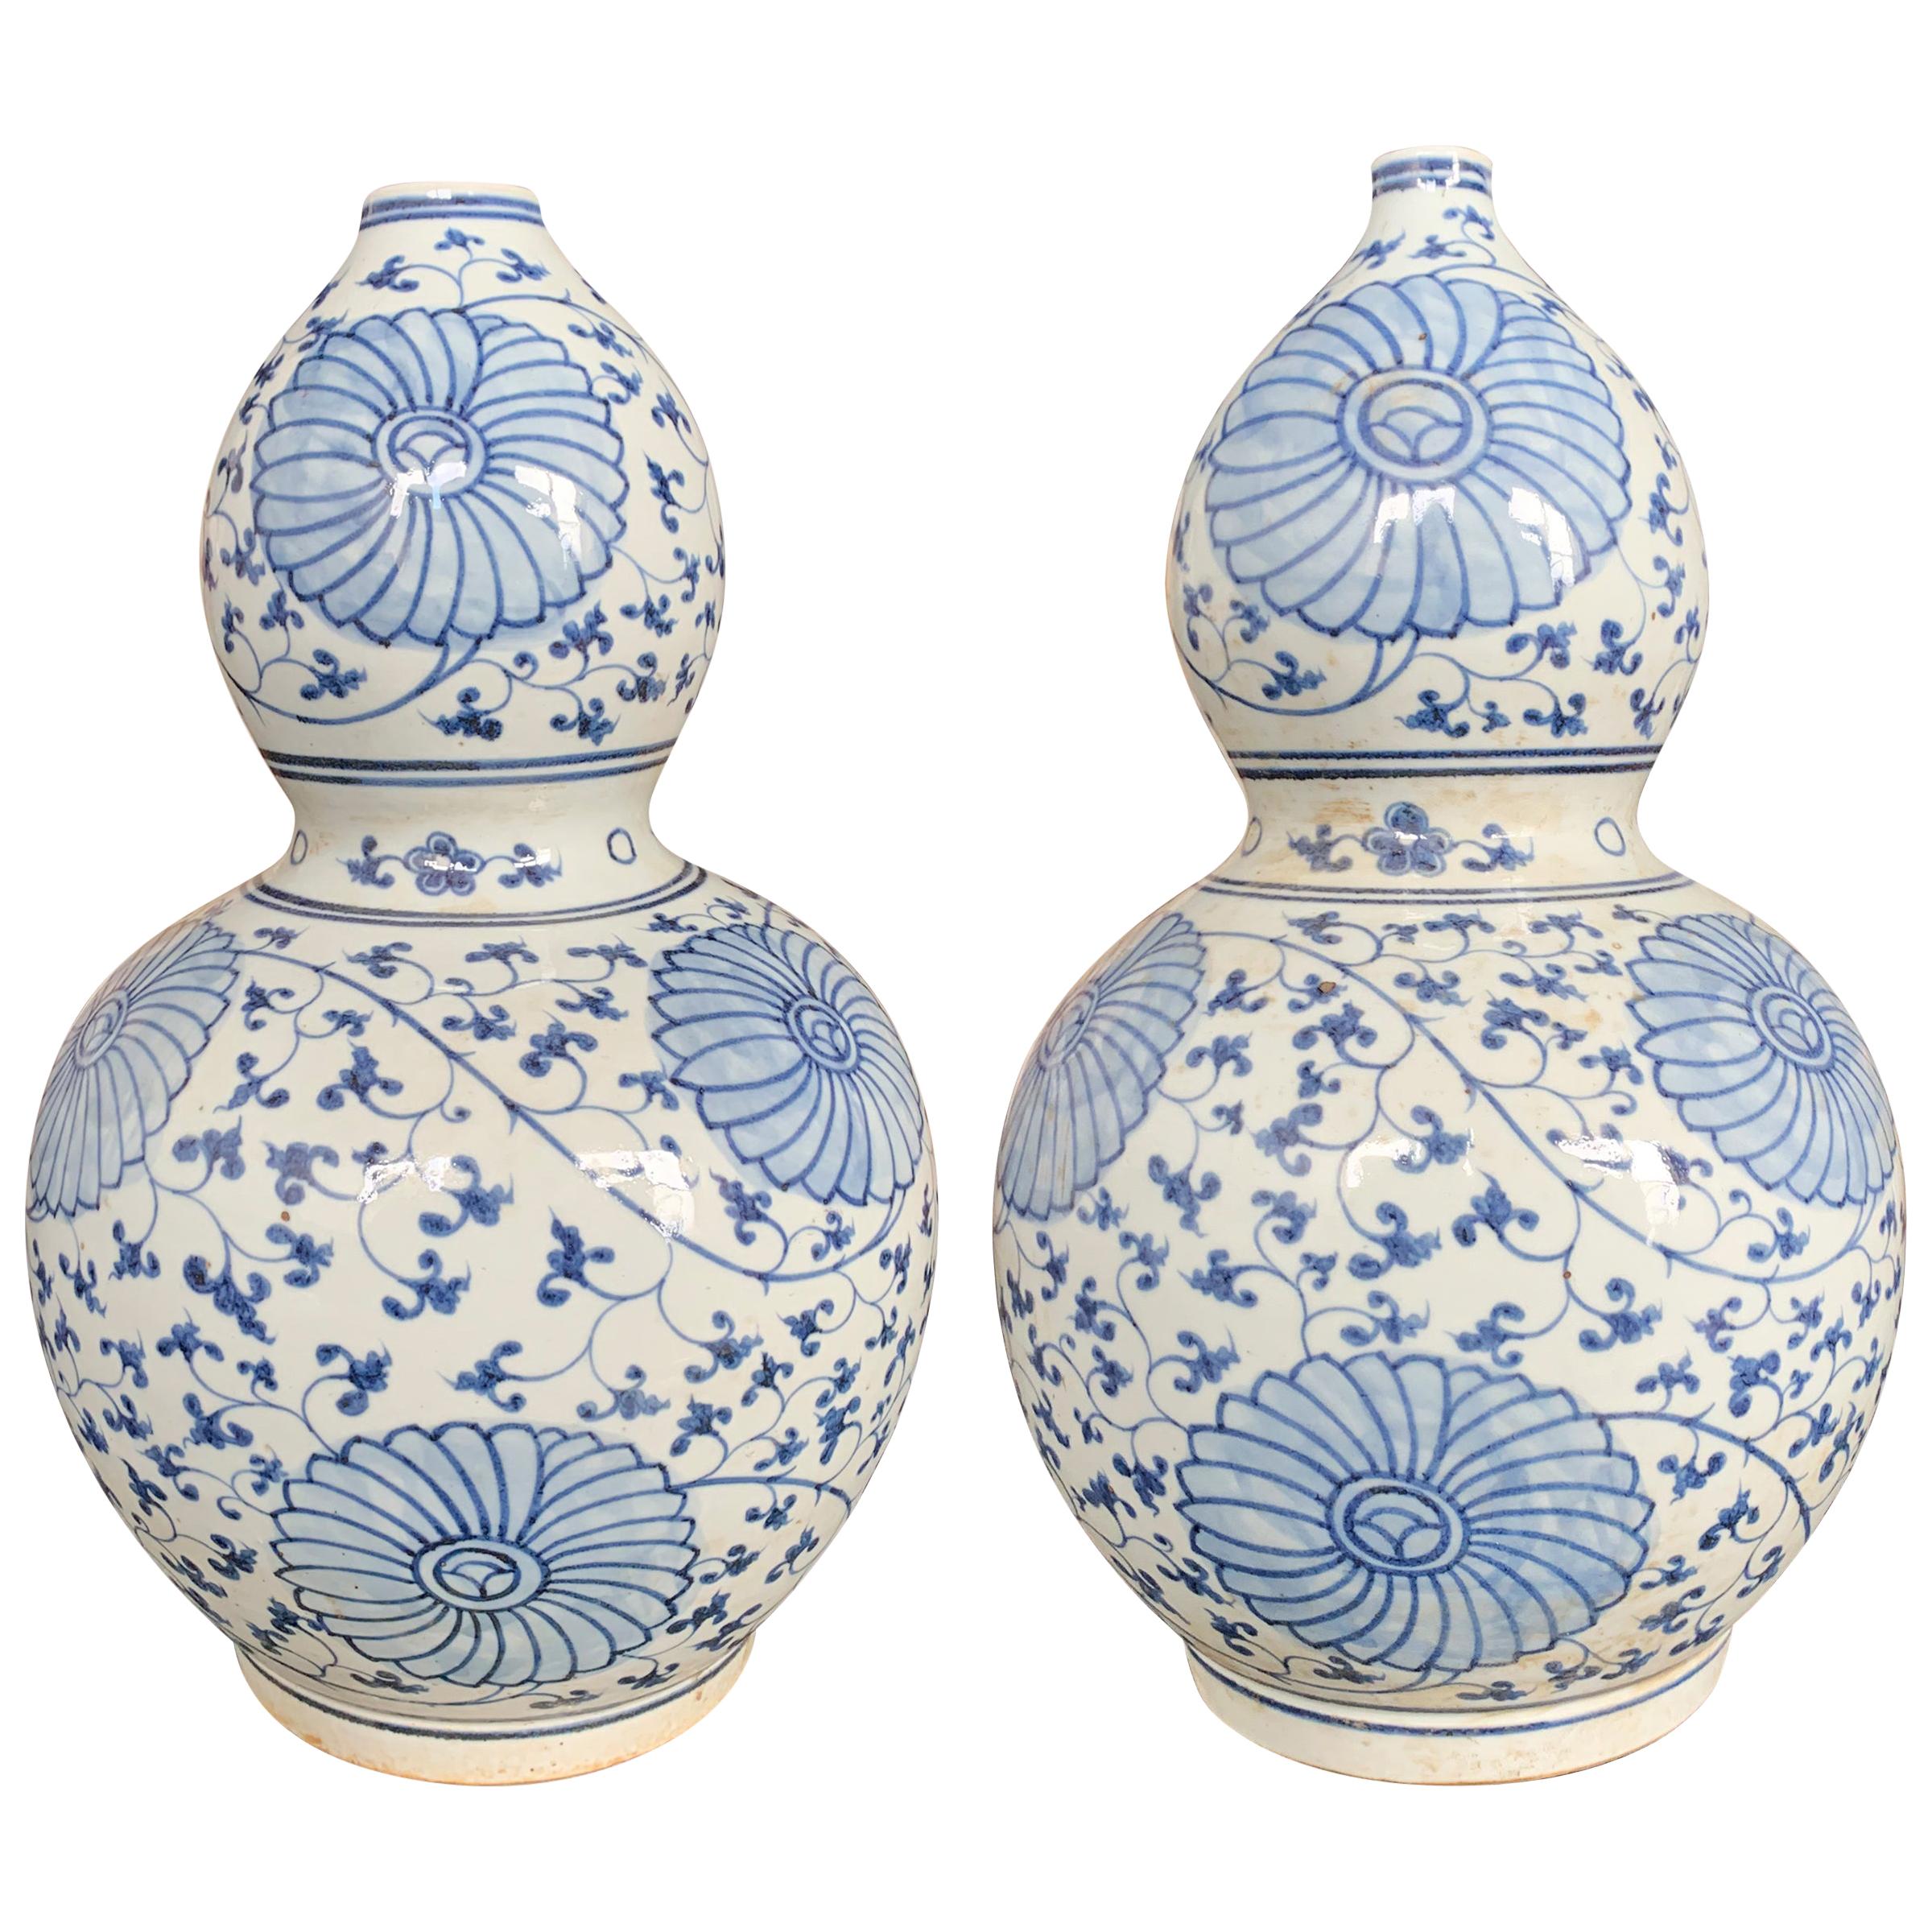 Pair of Chinese Blue and White Double-Gourd Vases